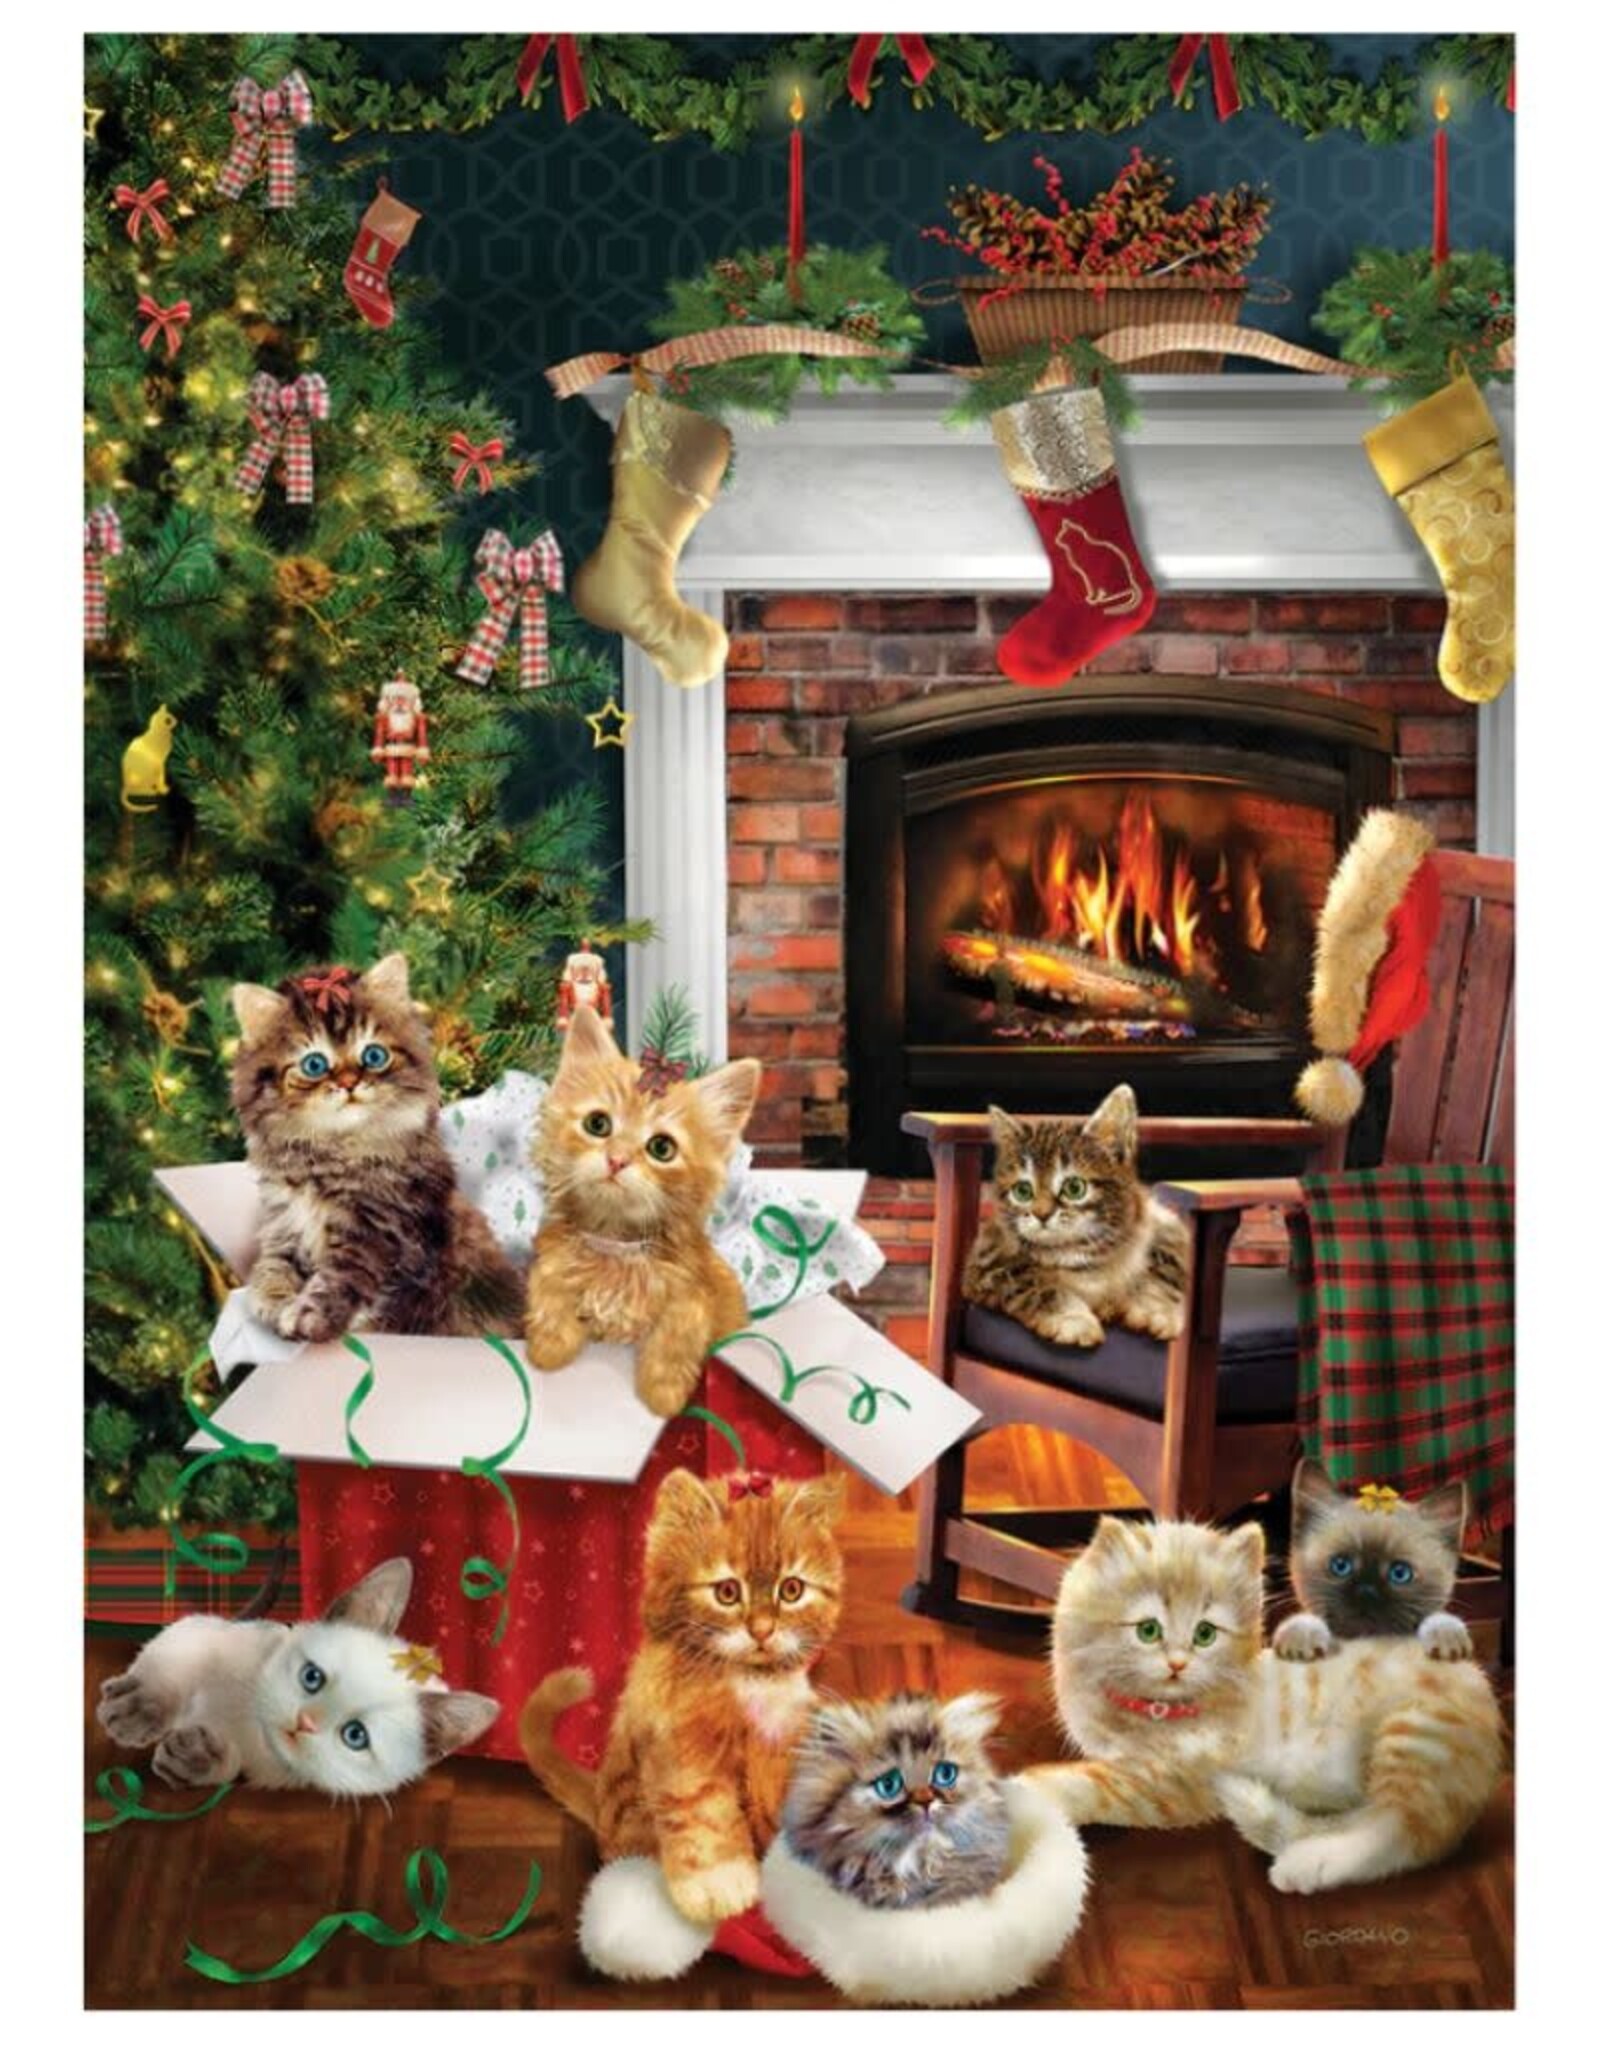 Cobble Hill Puzzles OM40216 Christmas Kittens 1000pc Cobble Hill Puzzle